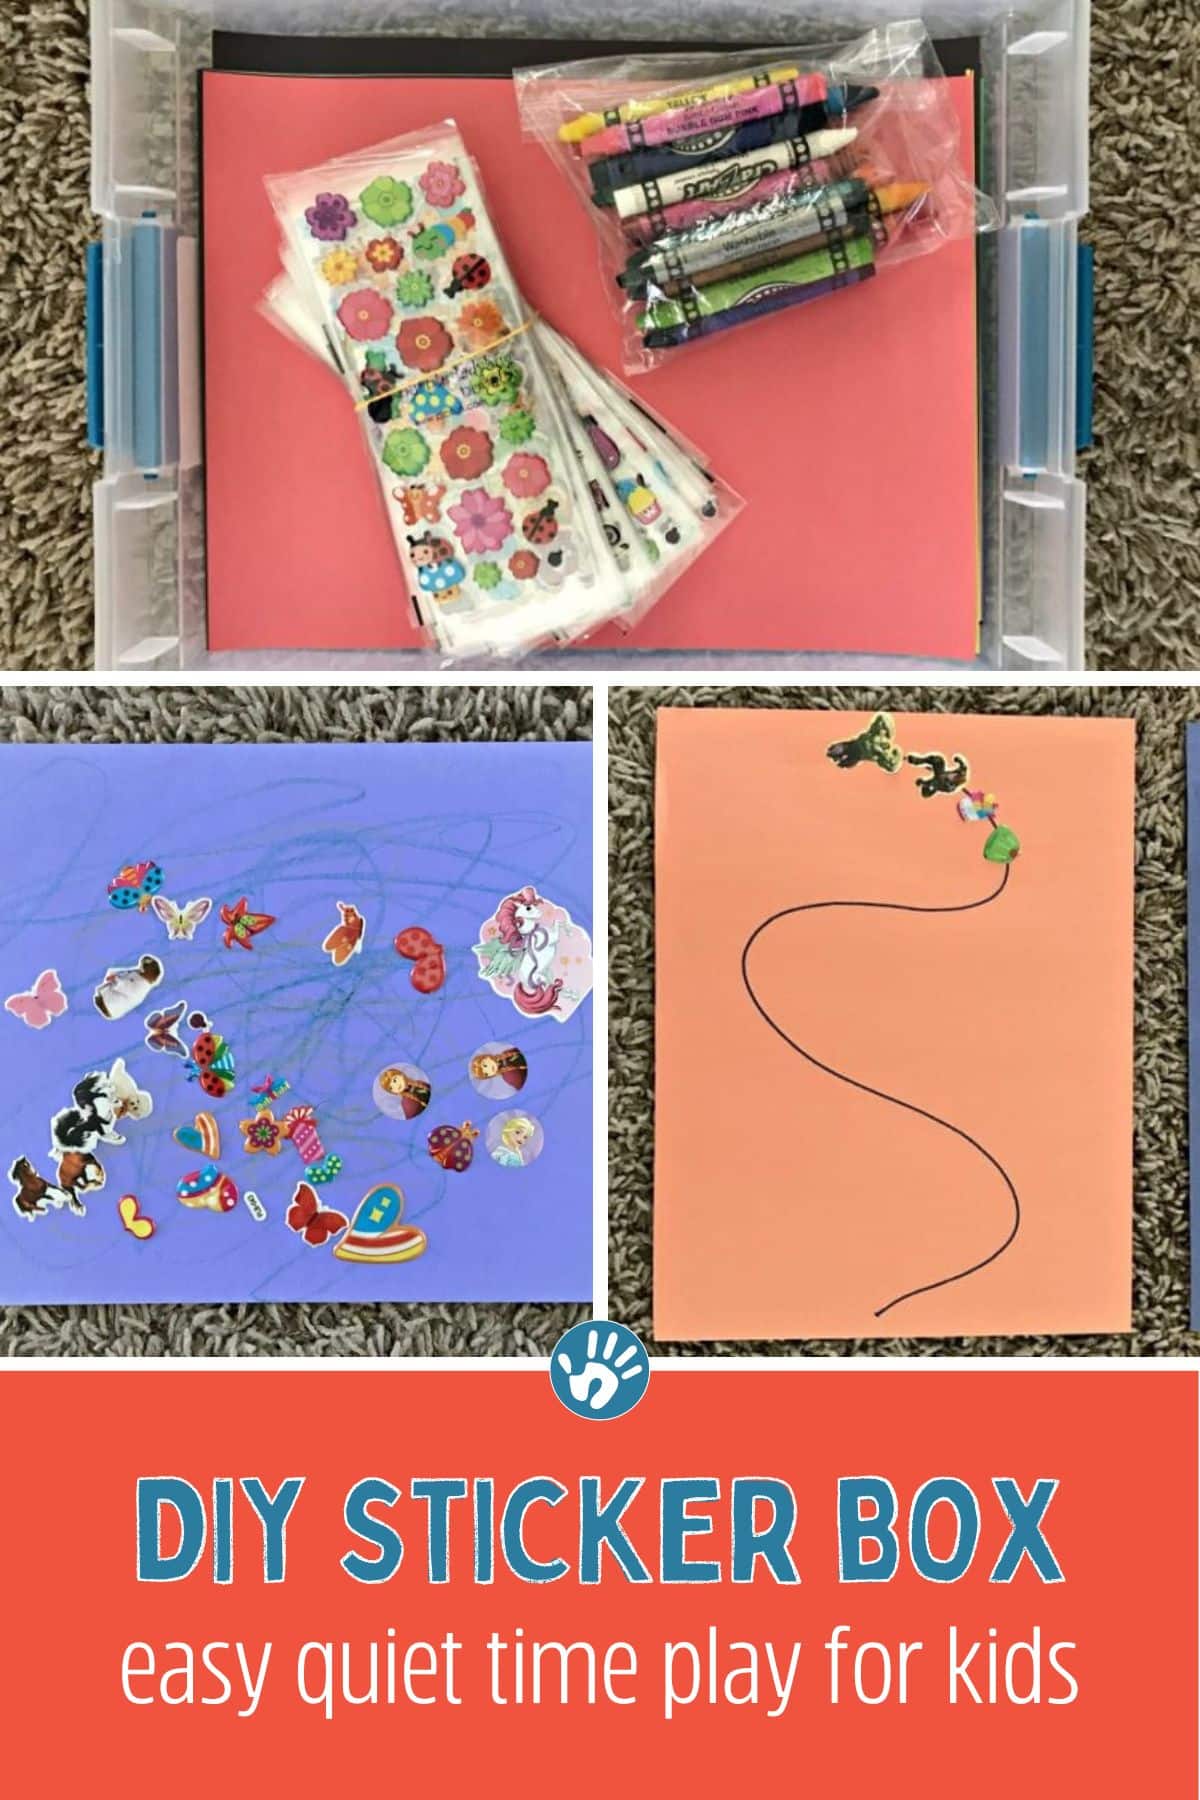 DIY Sticker Busy Box for Easy Quiet Time Play for Kids